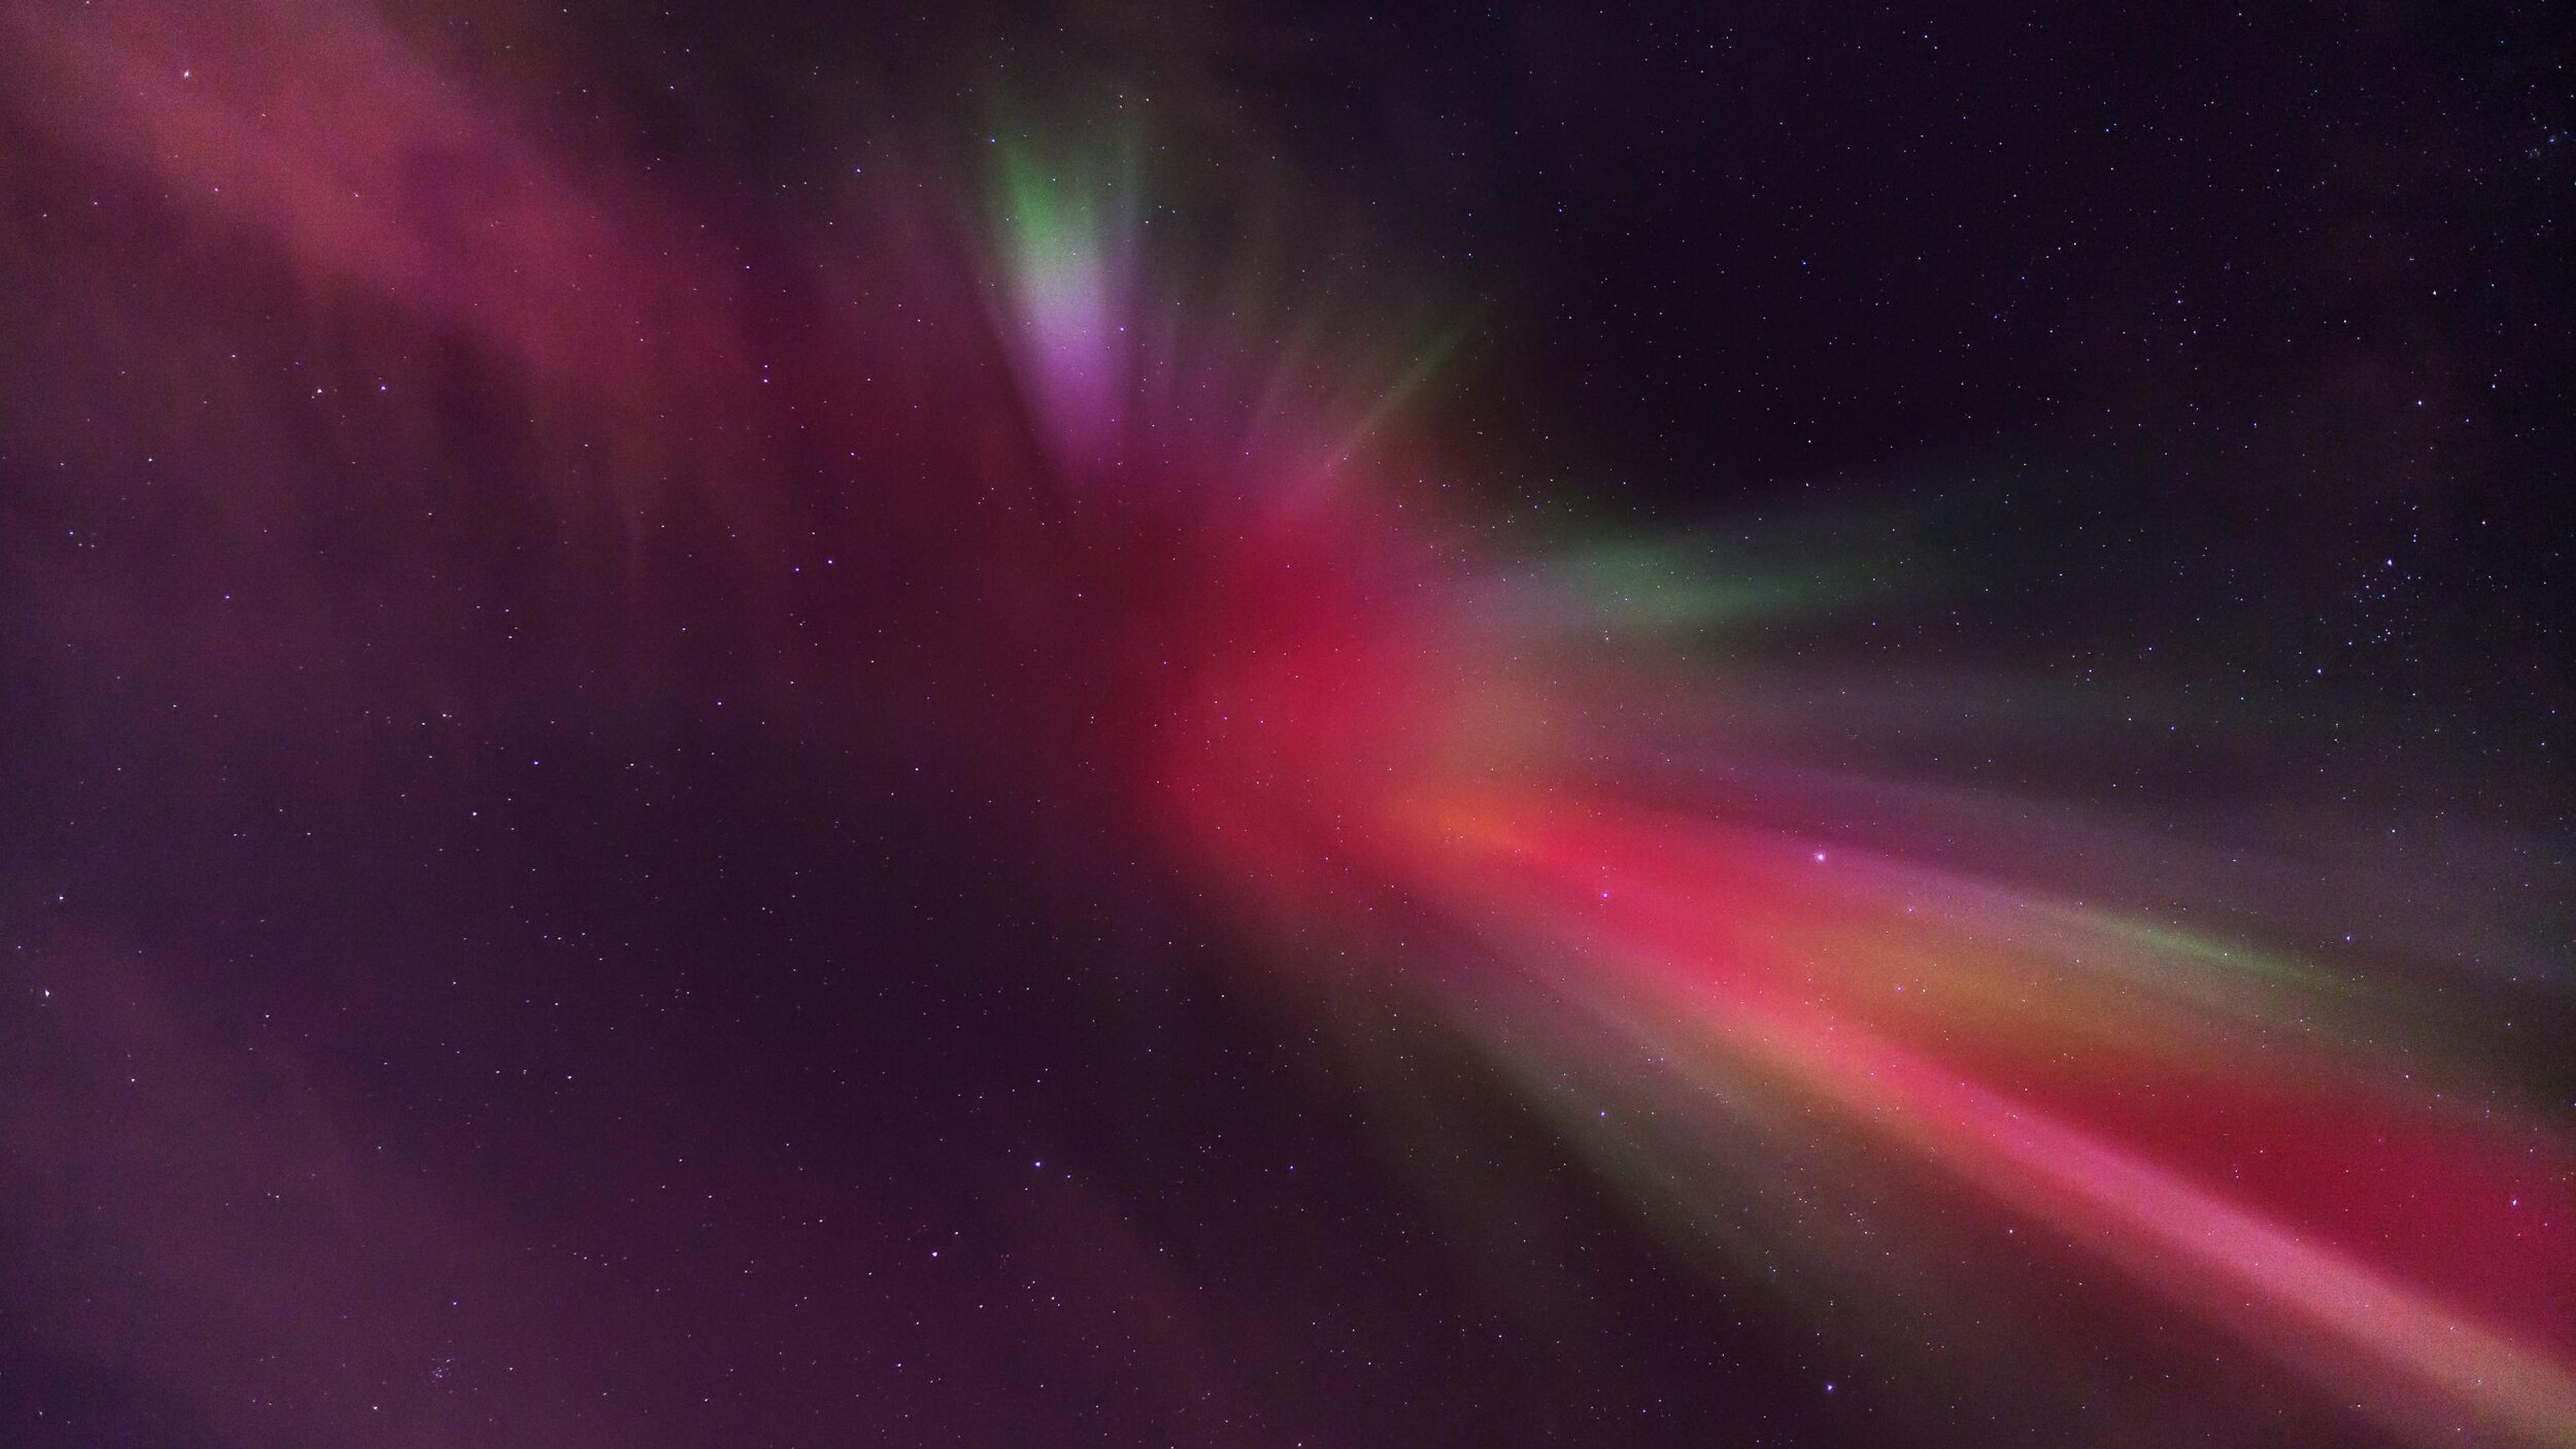 A vibrant display of Northern Lights in the night sky, showcasing a spectrum of green, red, and purple hues.